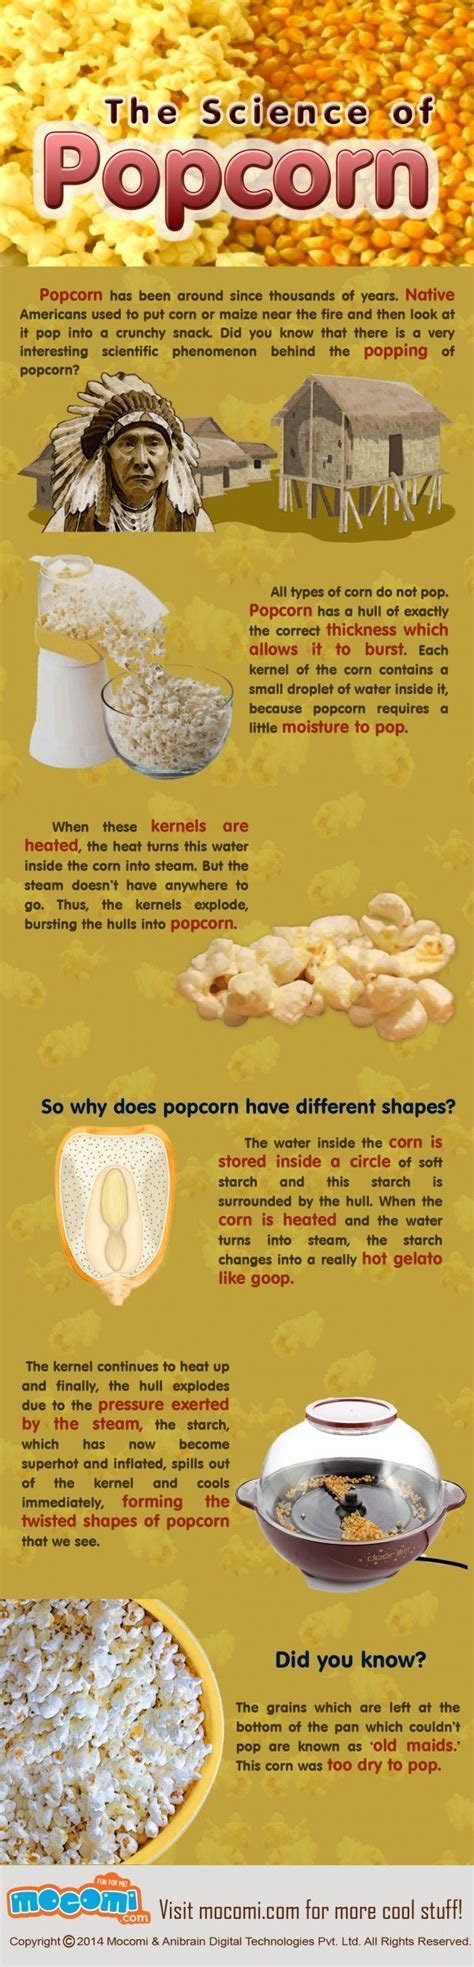 Science Infographic National Popcorn Month And Science Of Popcorn